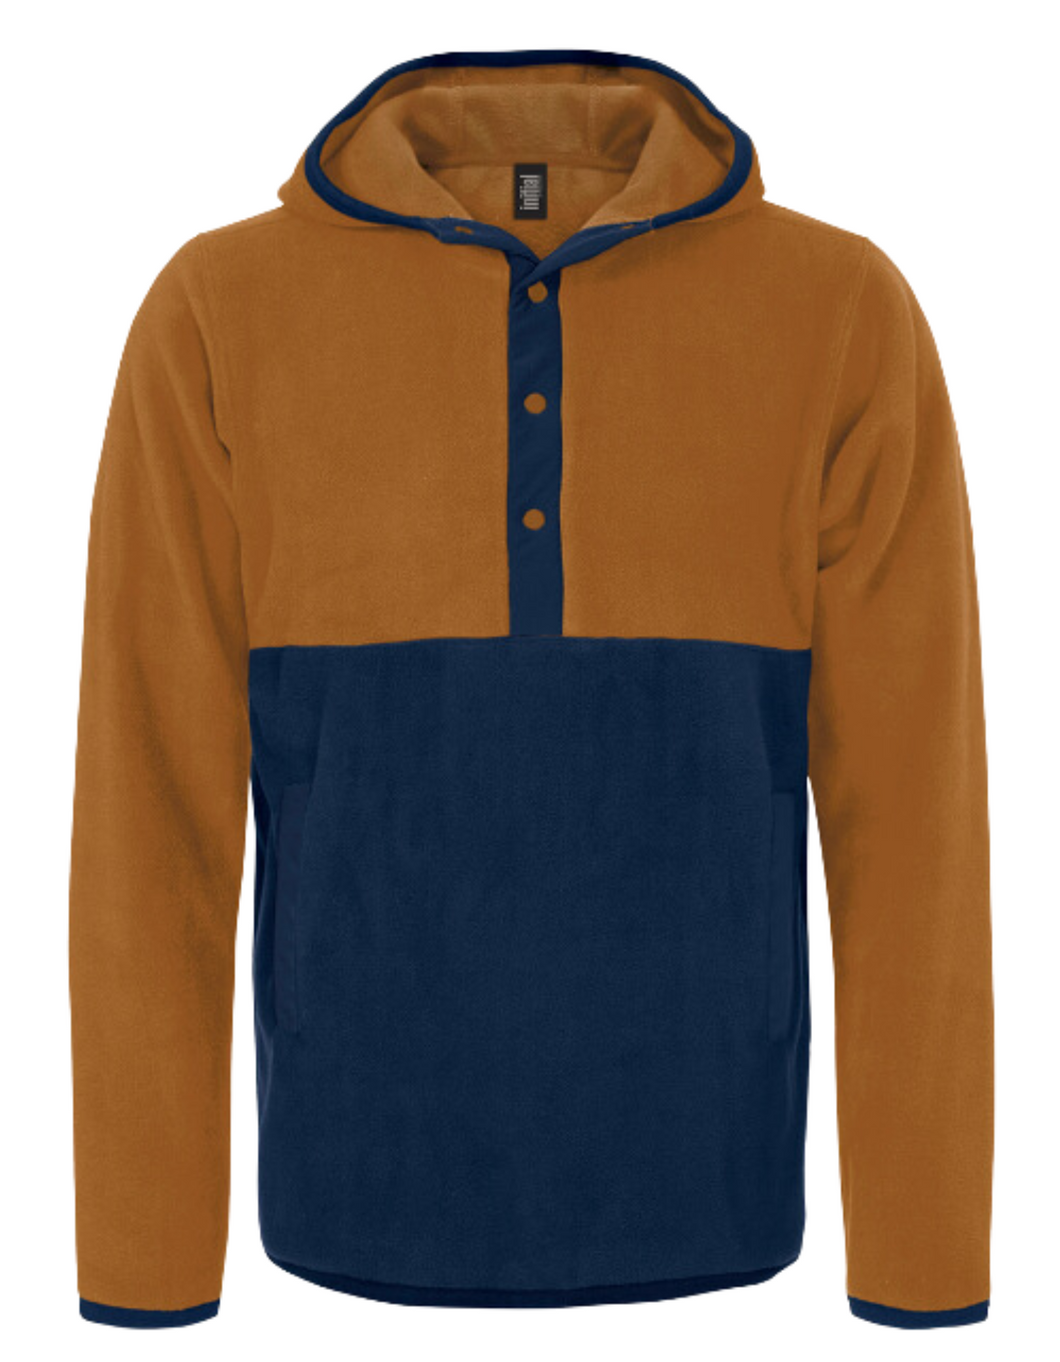 1/4 Button-Down Hoodie Unisex - Brown/Navy (For Embroidery Designs)